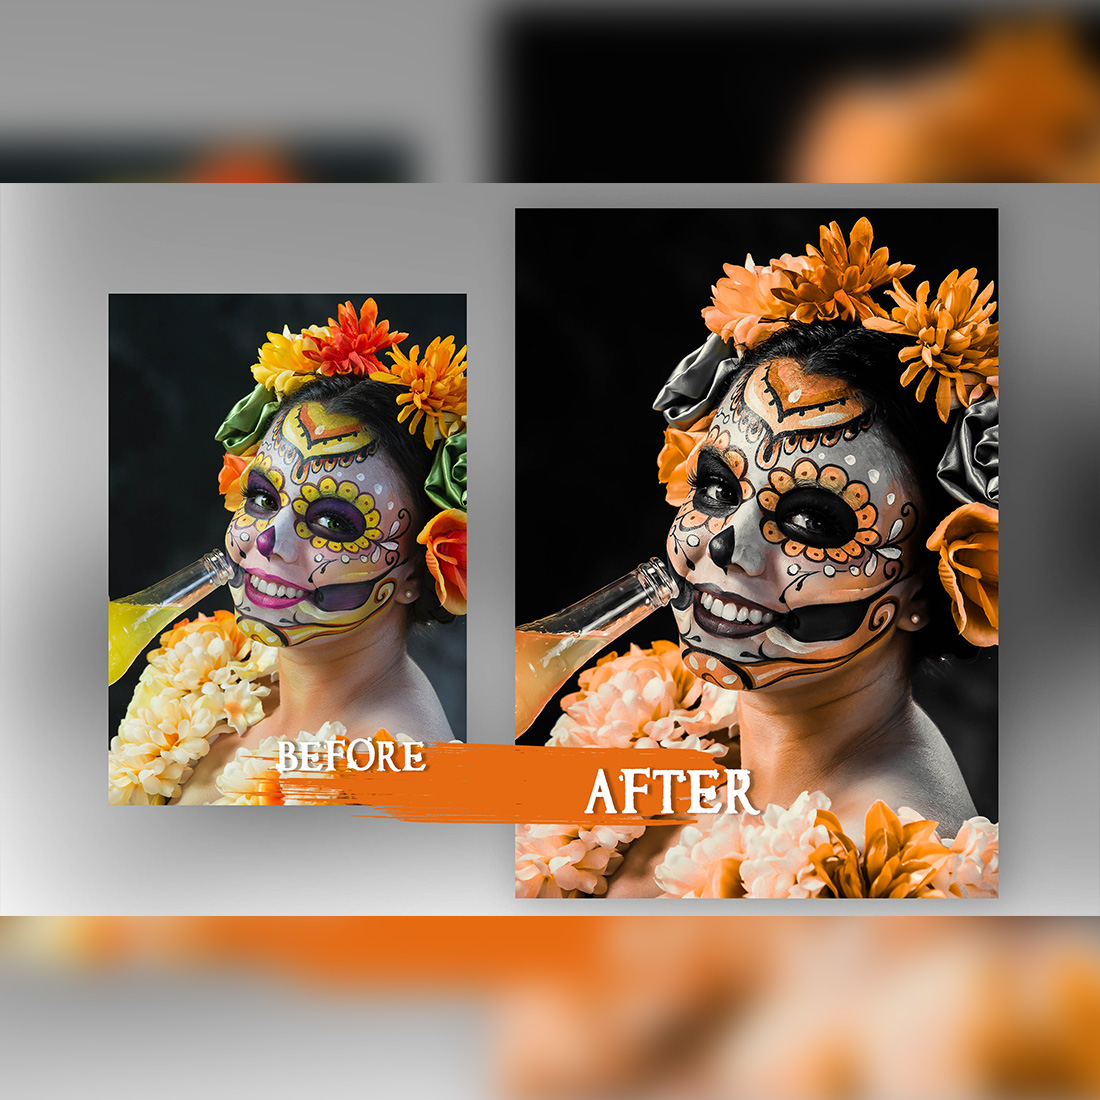 12 Photoshop Actions, Halloween In Color Ps Action, Moody ACR Preset, Fall Filter, Lifestyle Theme For Instagram, Autumn Presets, Gray portrait preview image.